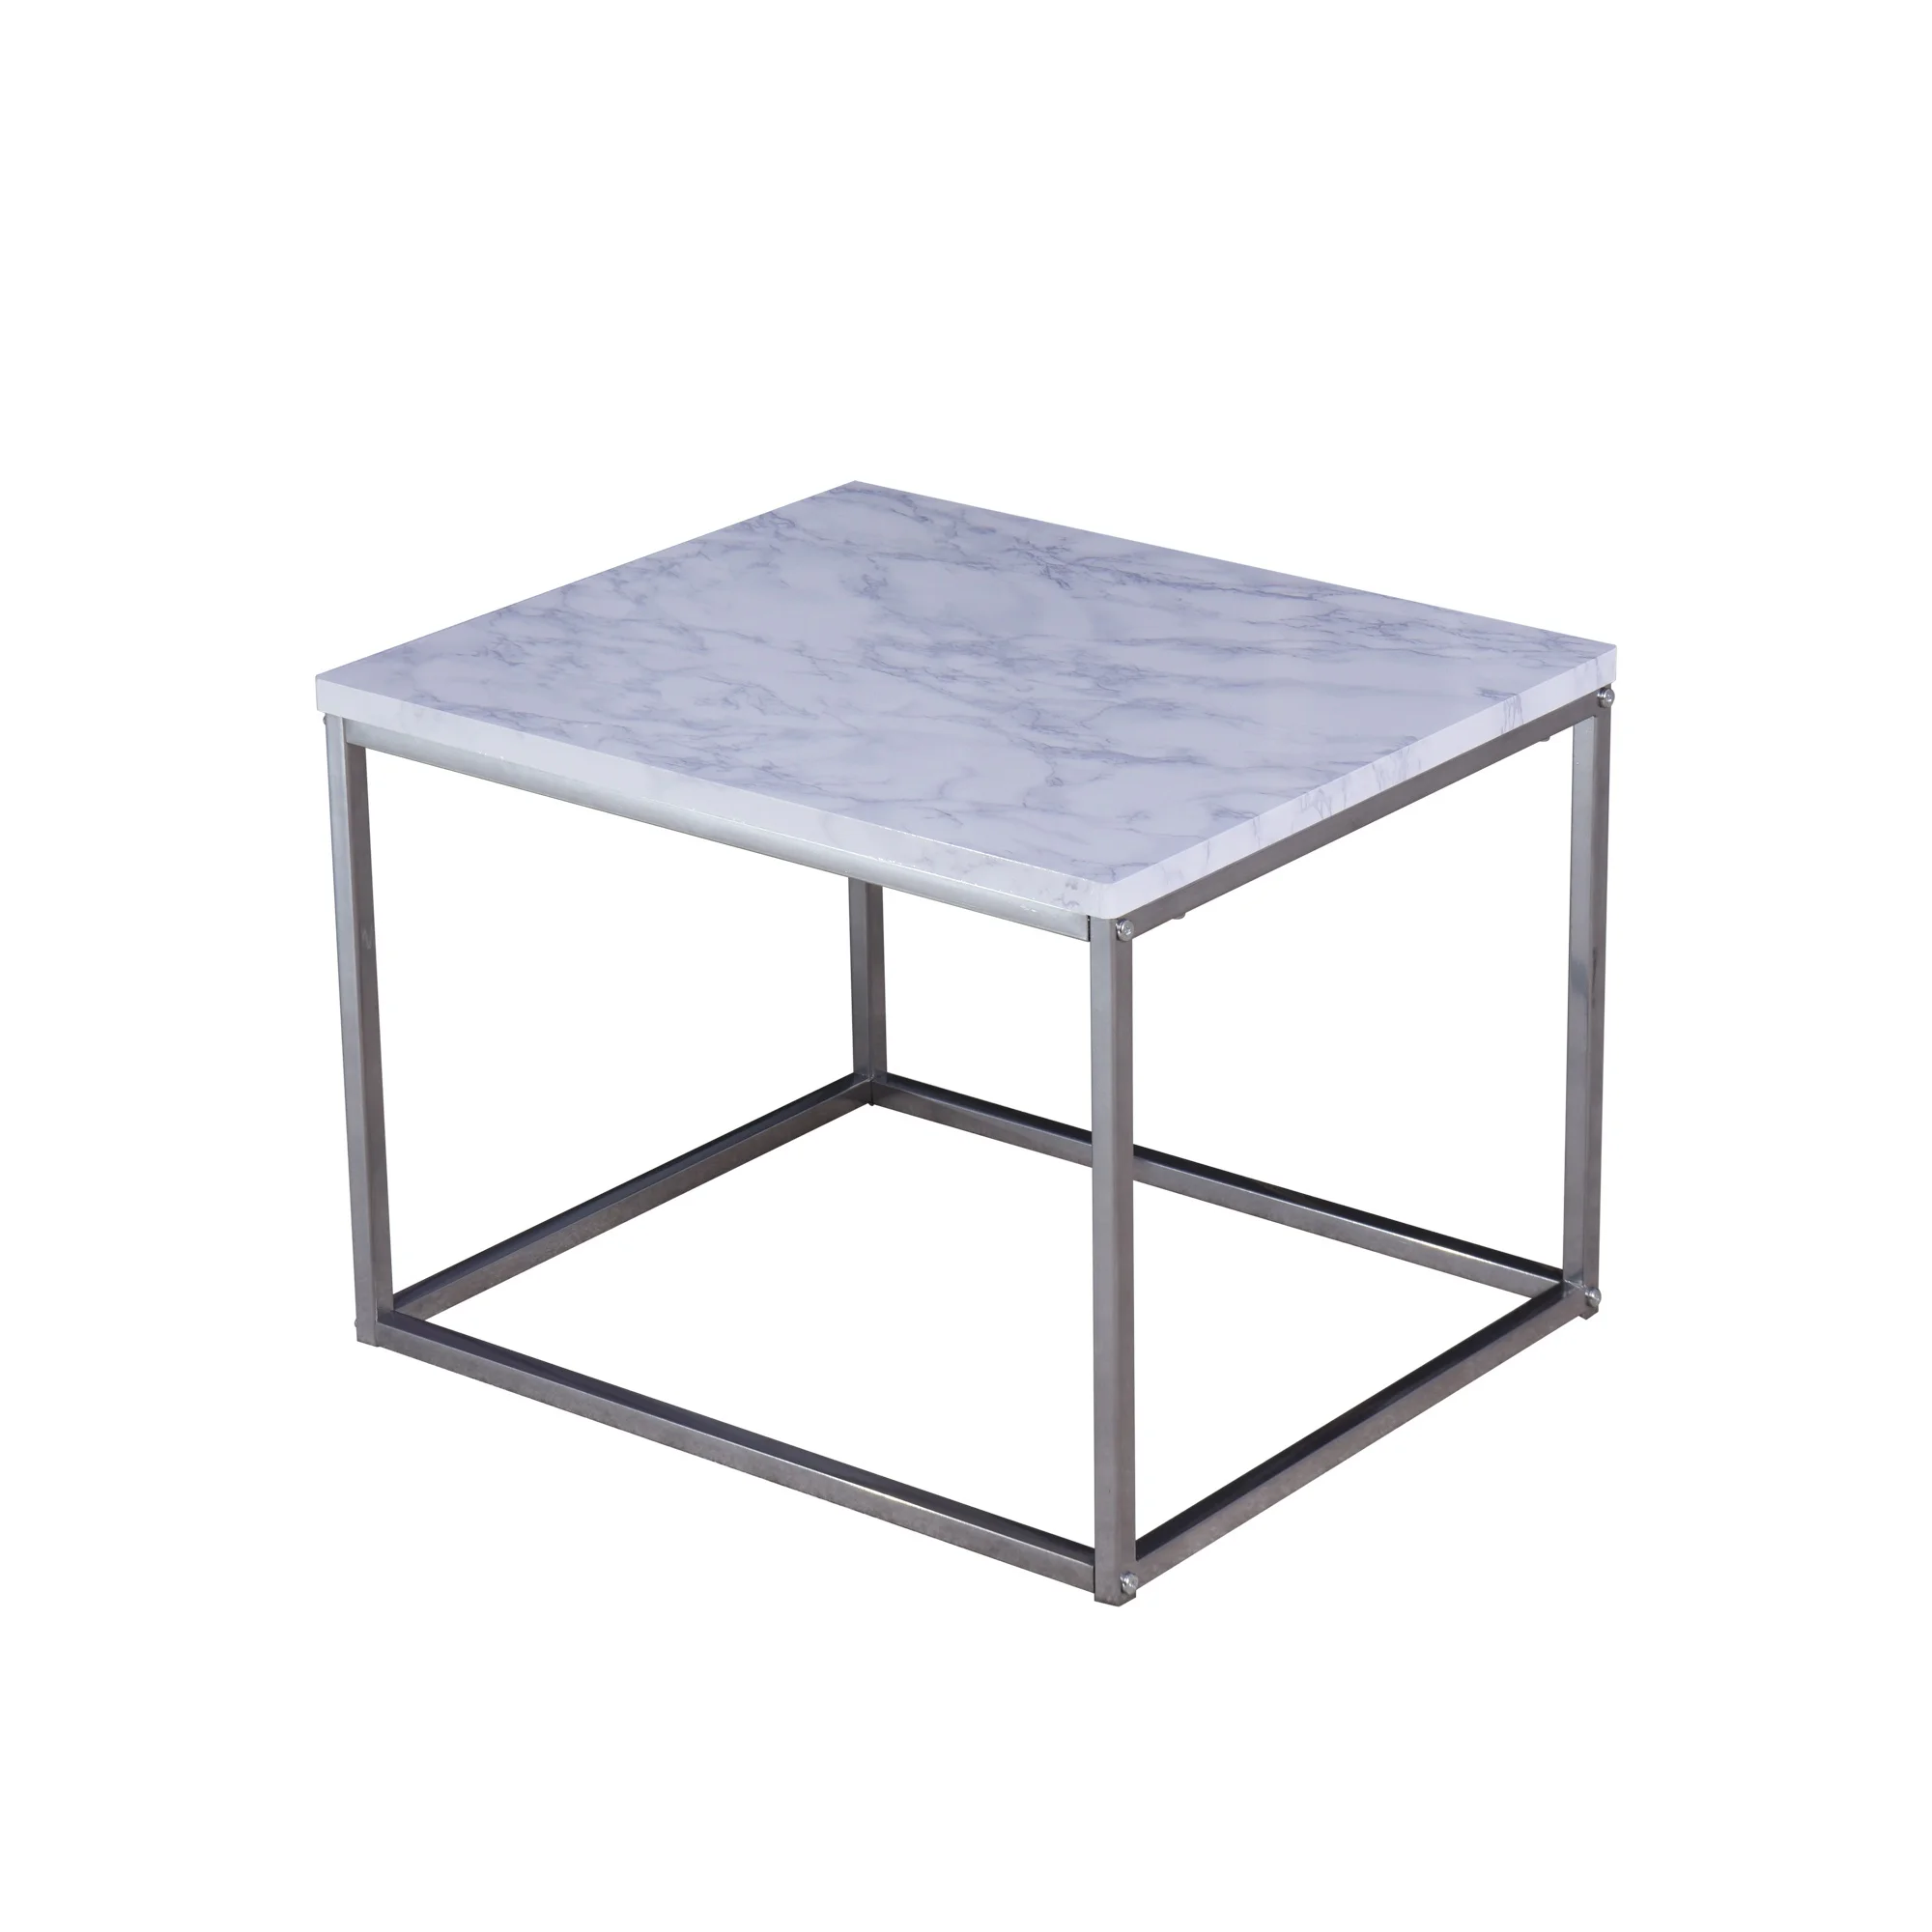 

Living Room White Coffee Table with MDF Top, Nesting Table with Metal Legs 17.71 x 20.87 x 15.36 inch